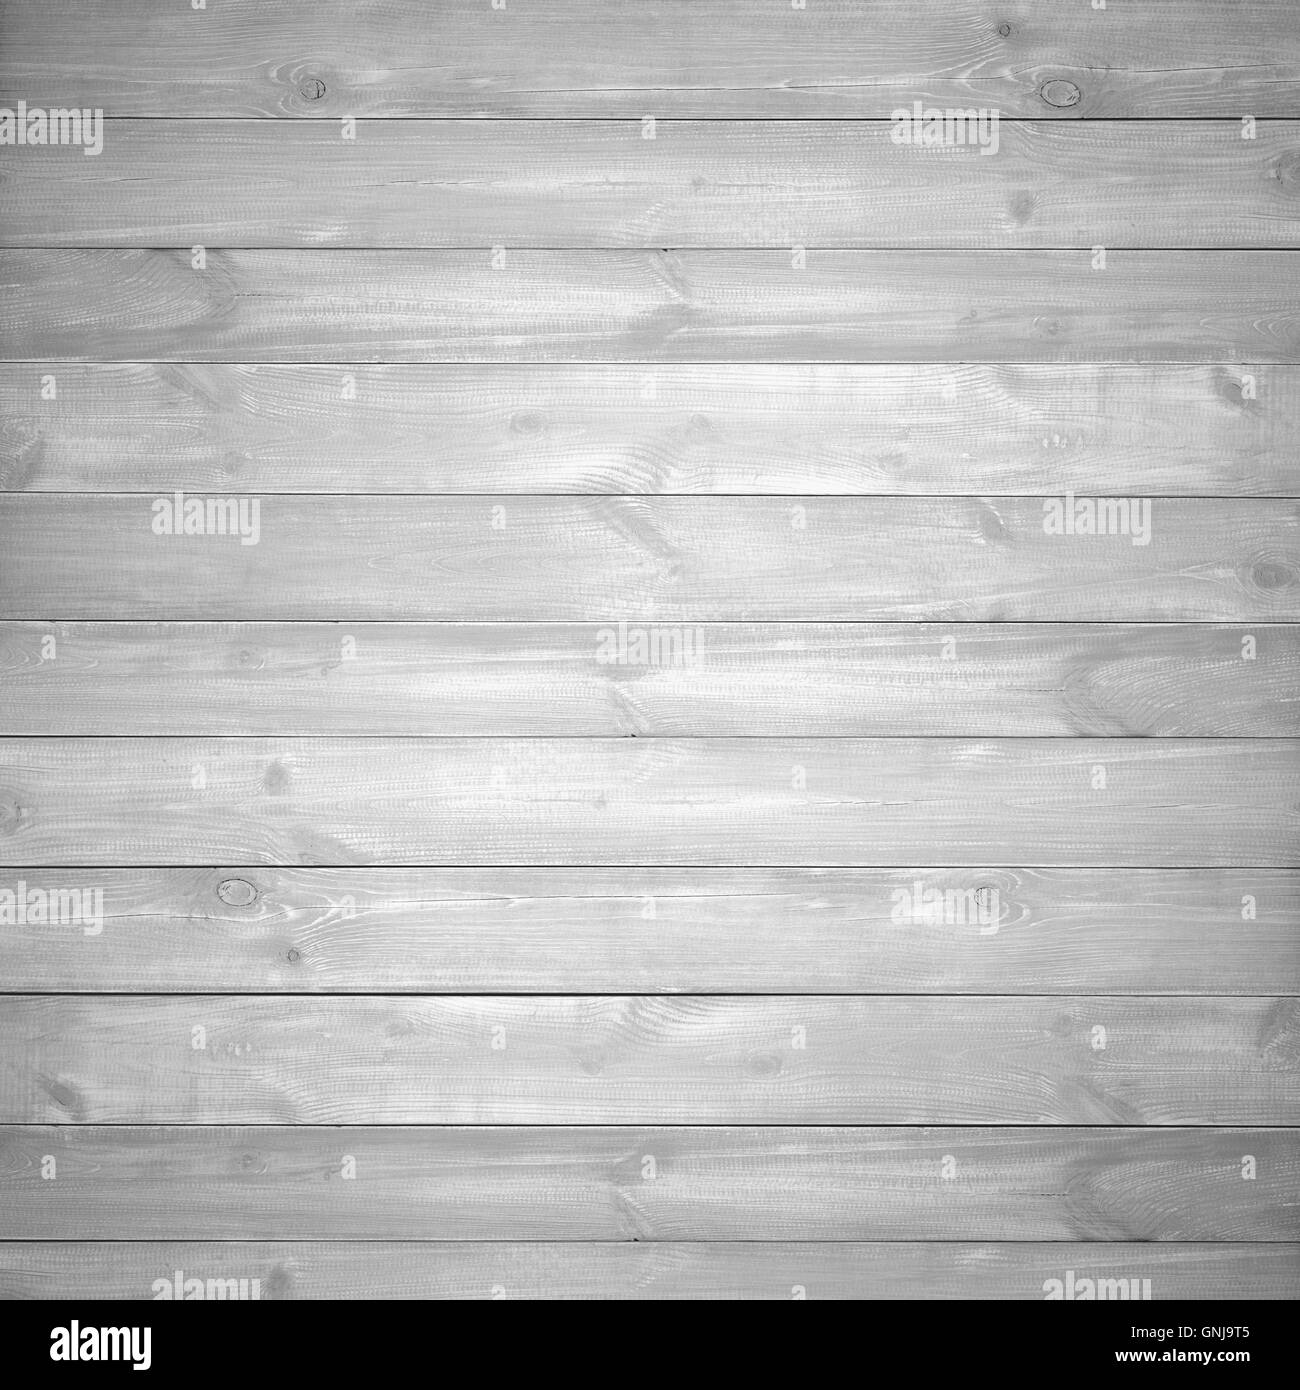 white wood background on natural wooden texture Stock Photo